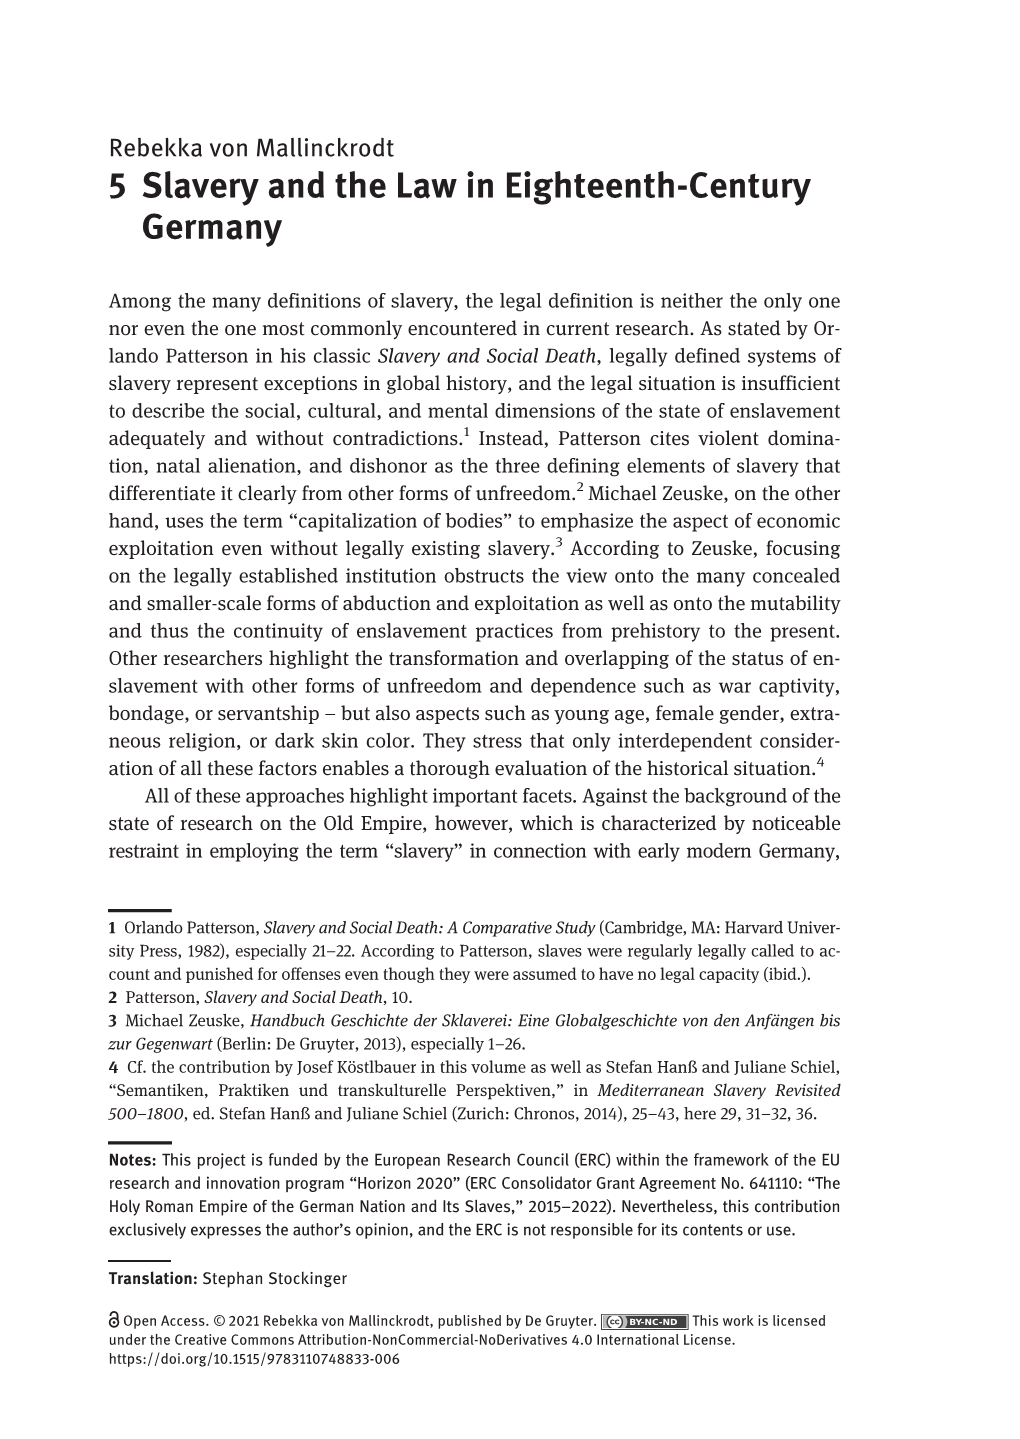 5 Slavery and the Law in Eighteenth-Century Germany